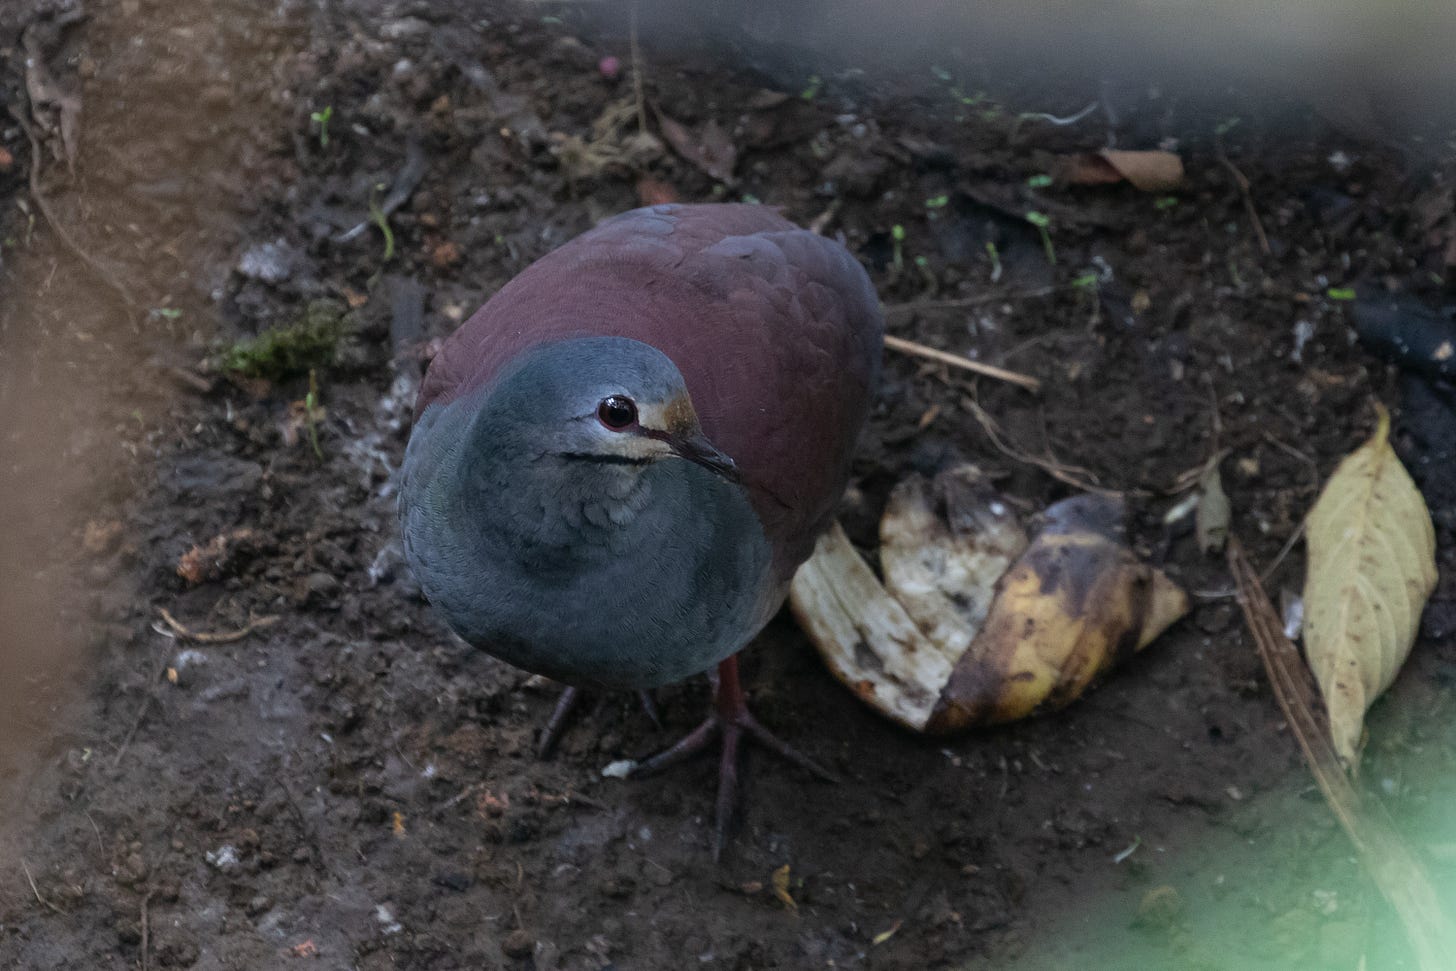 a purple-backed, blue-fronted dove stands on the dirt beside a rotten banana peel. it has a pale face with dark striped on its lores and under its beak. it is facing the viewer, looking to its left.